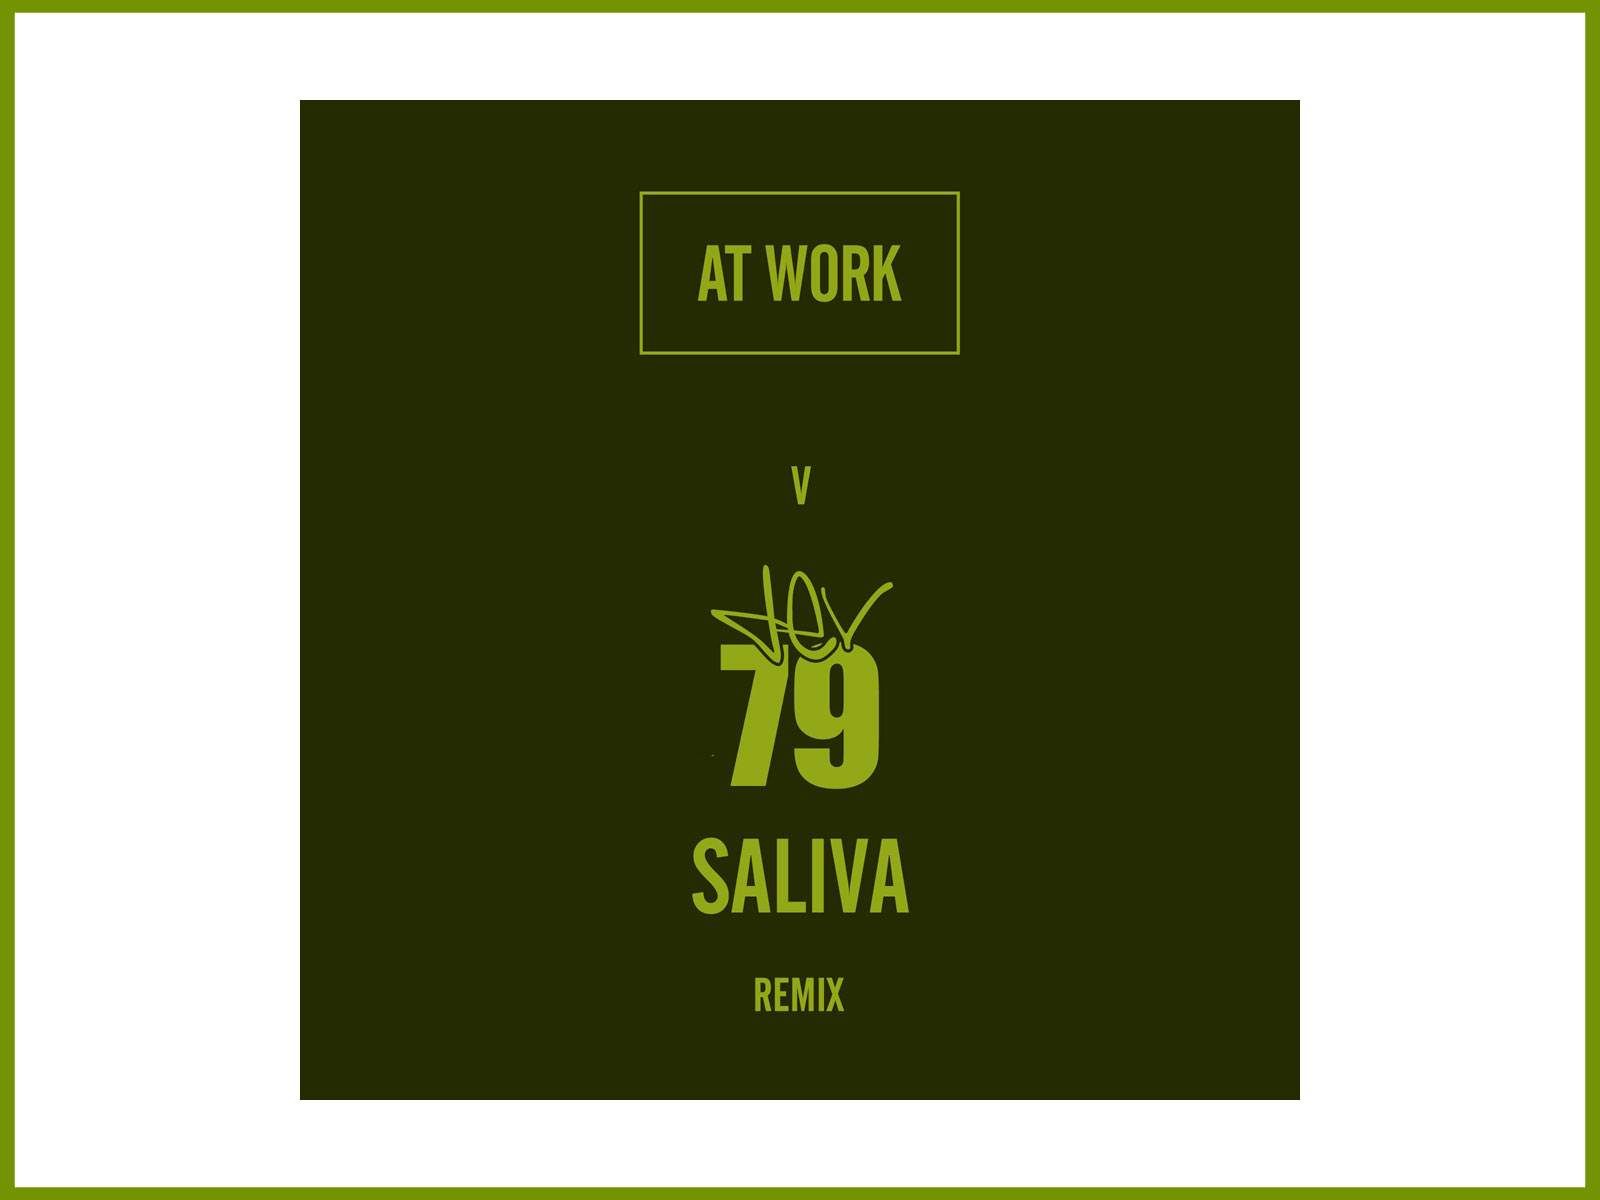 Available (no more) At Work remixes Dev79 “Saliva”